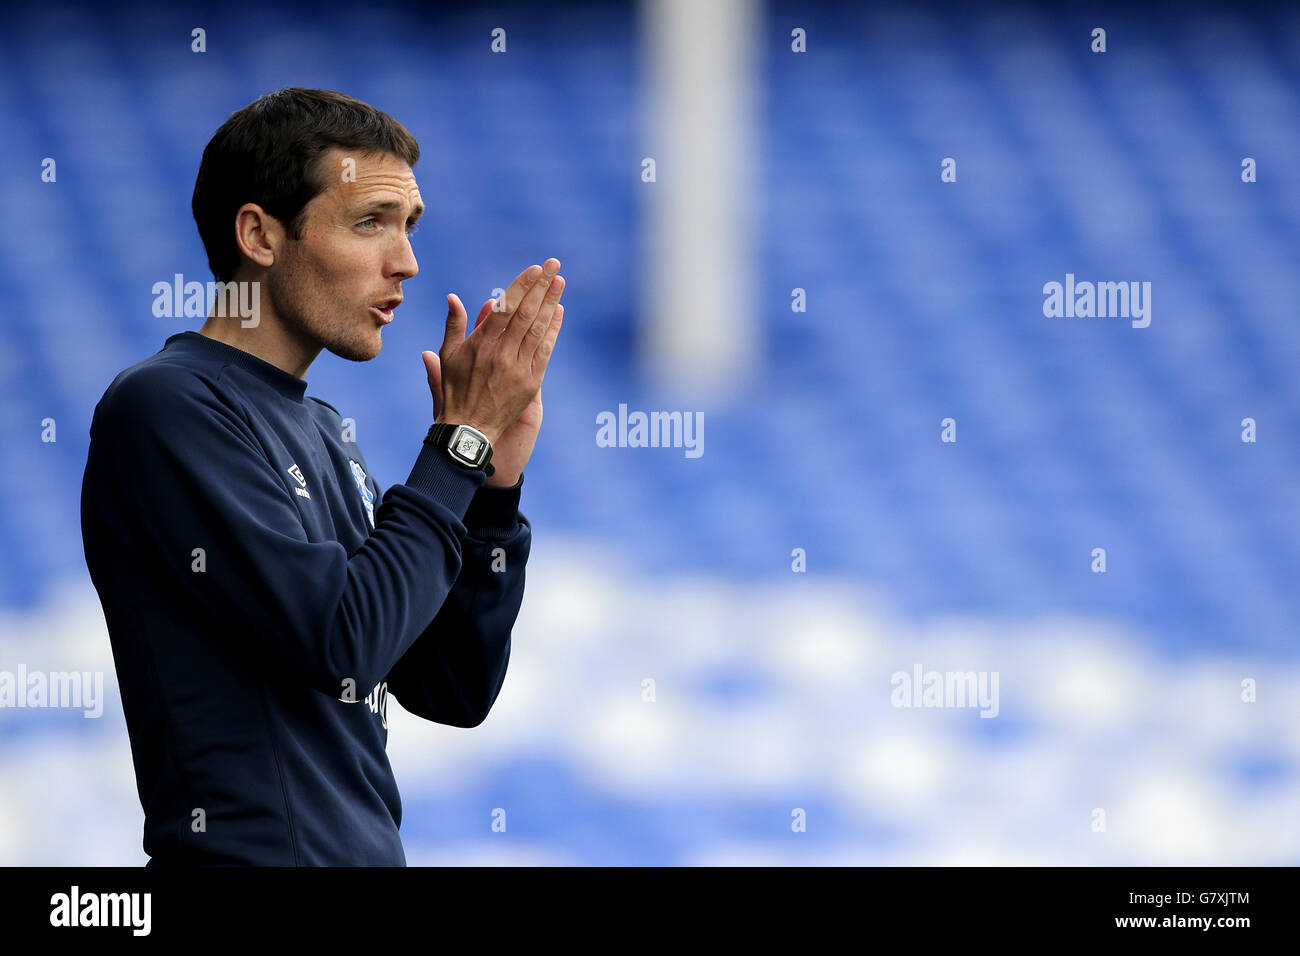 Soccer - Women's FA Cup - Semi Final - Everton Ladies v Notts County Ladies - Goodison Park. Everton Ladies Manager Andy Spence Stock Photo